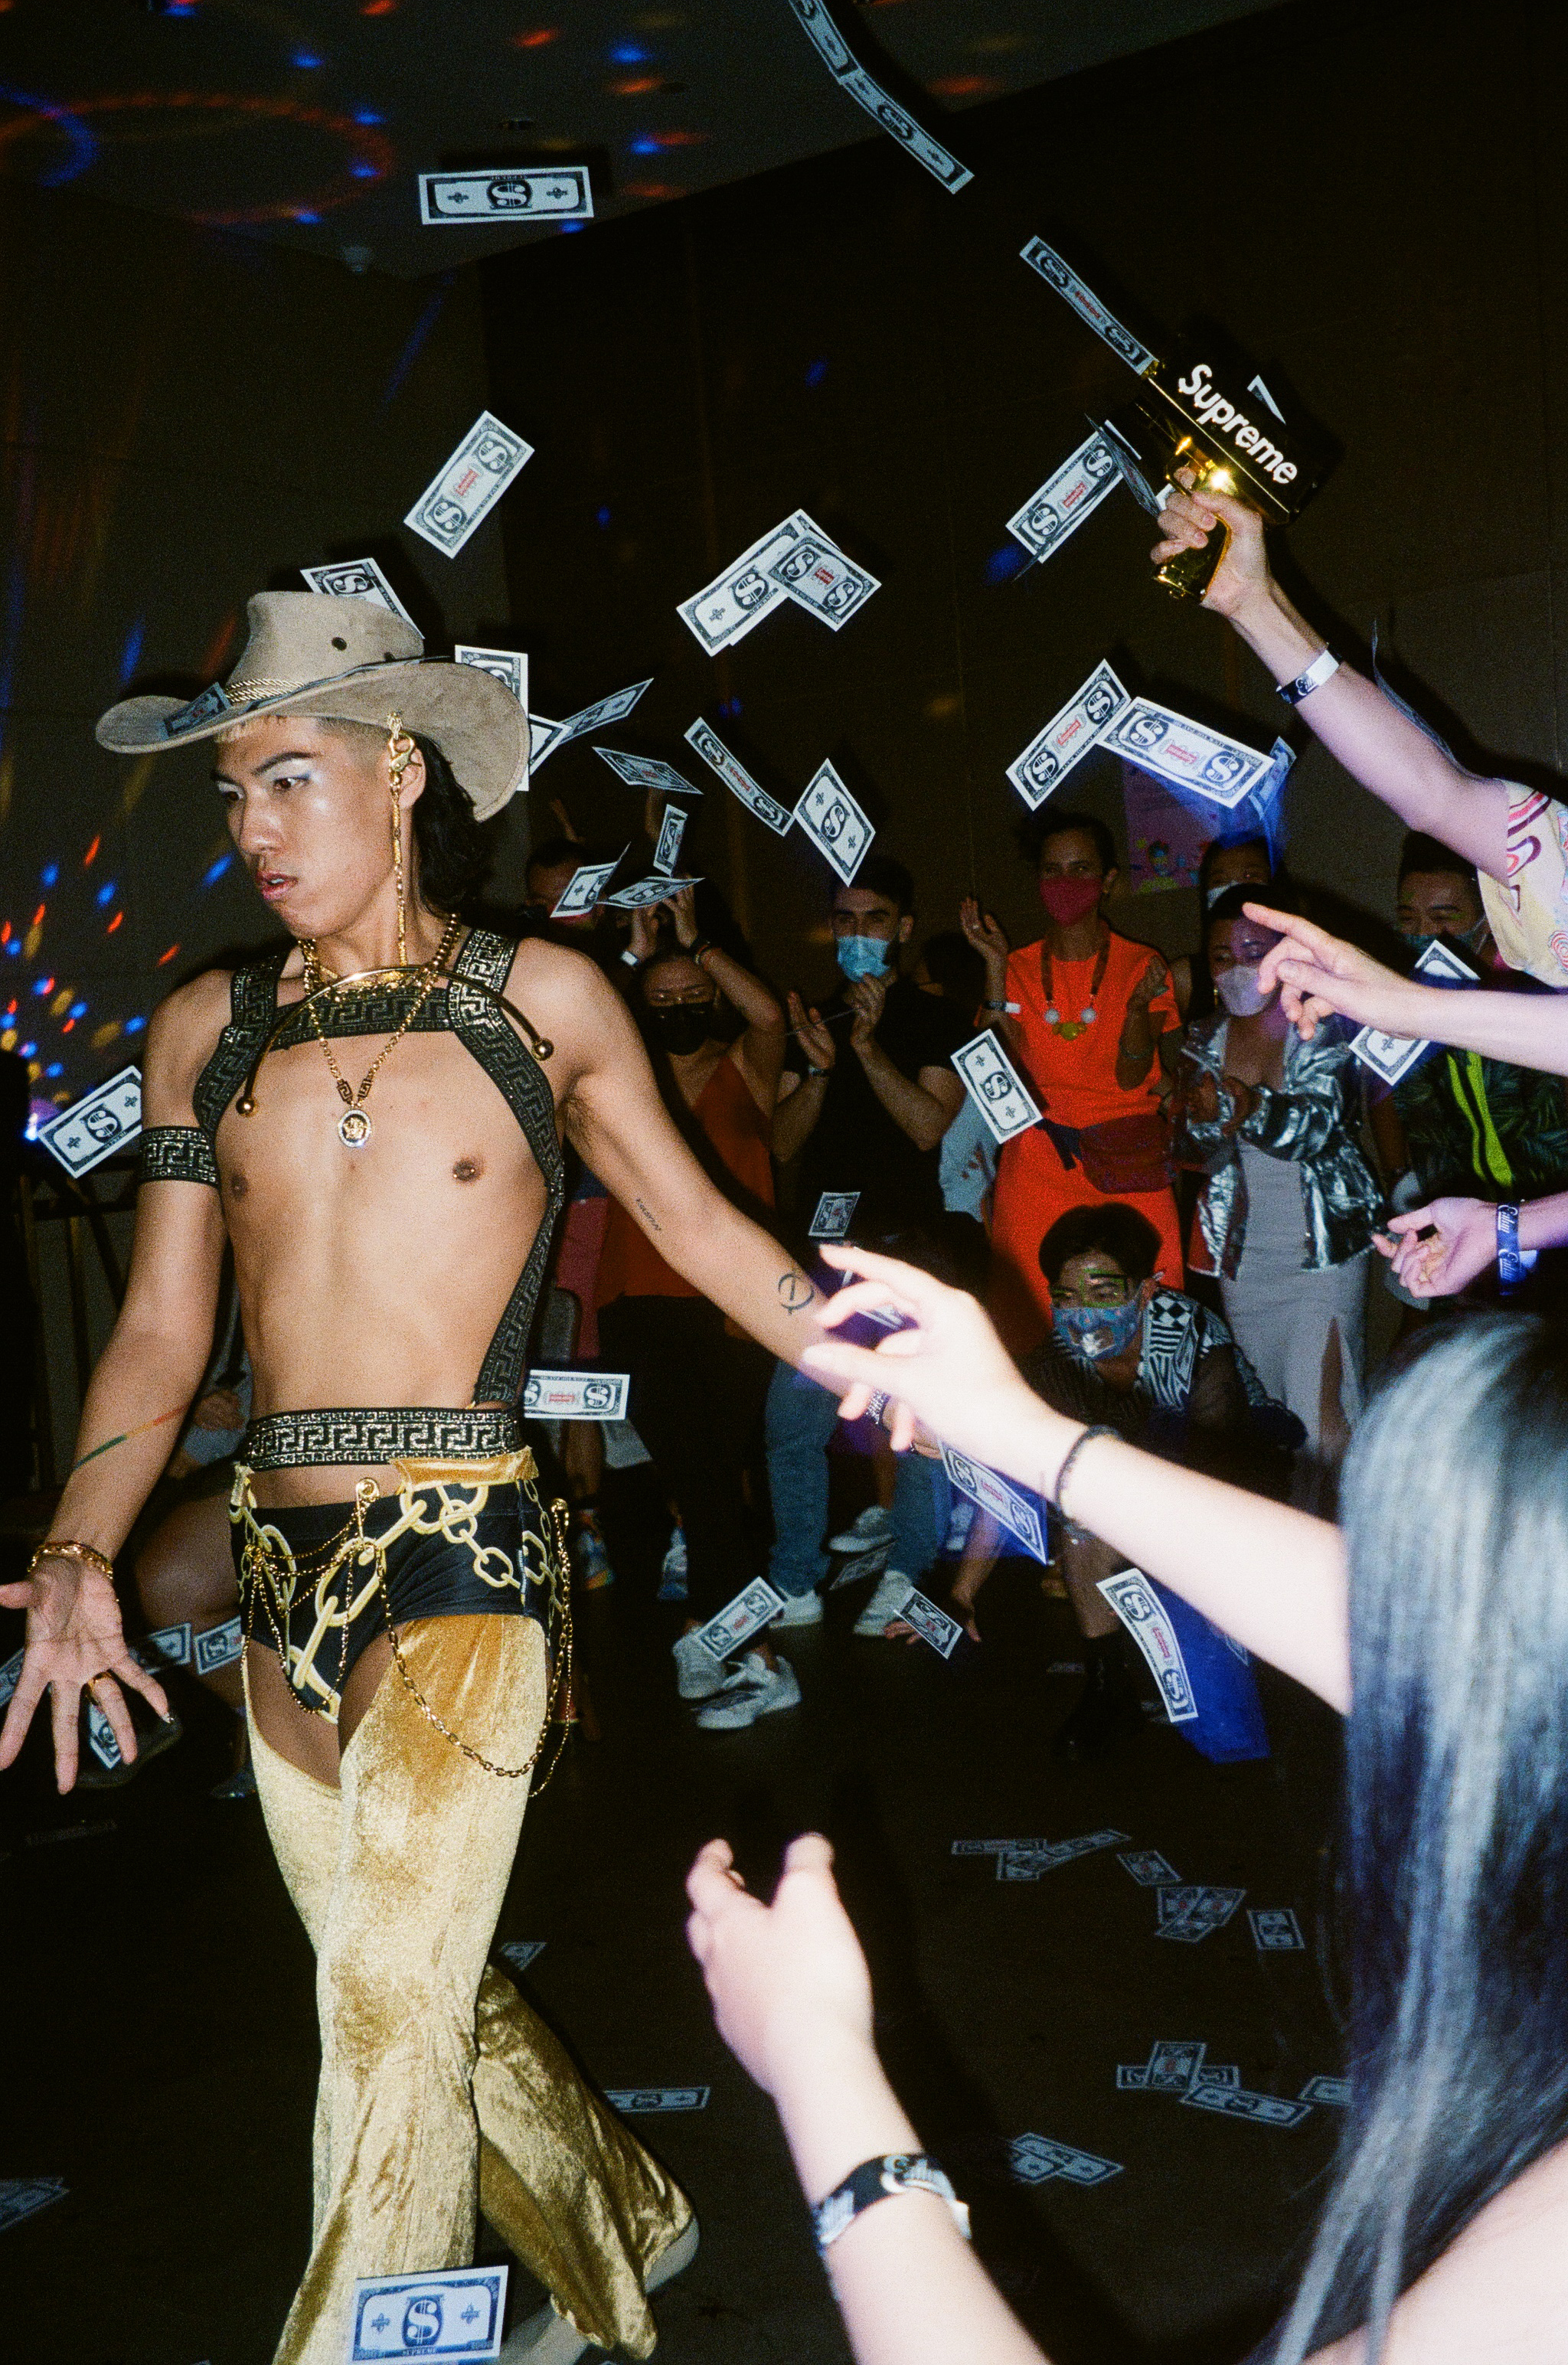 A man in gold chaps and a cowboy hat struts as money is thrown at him.